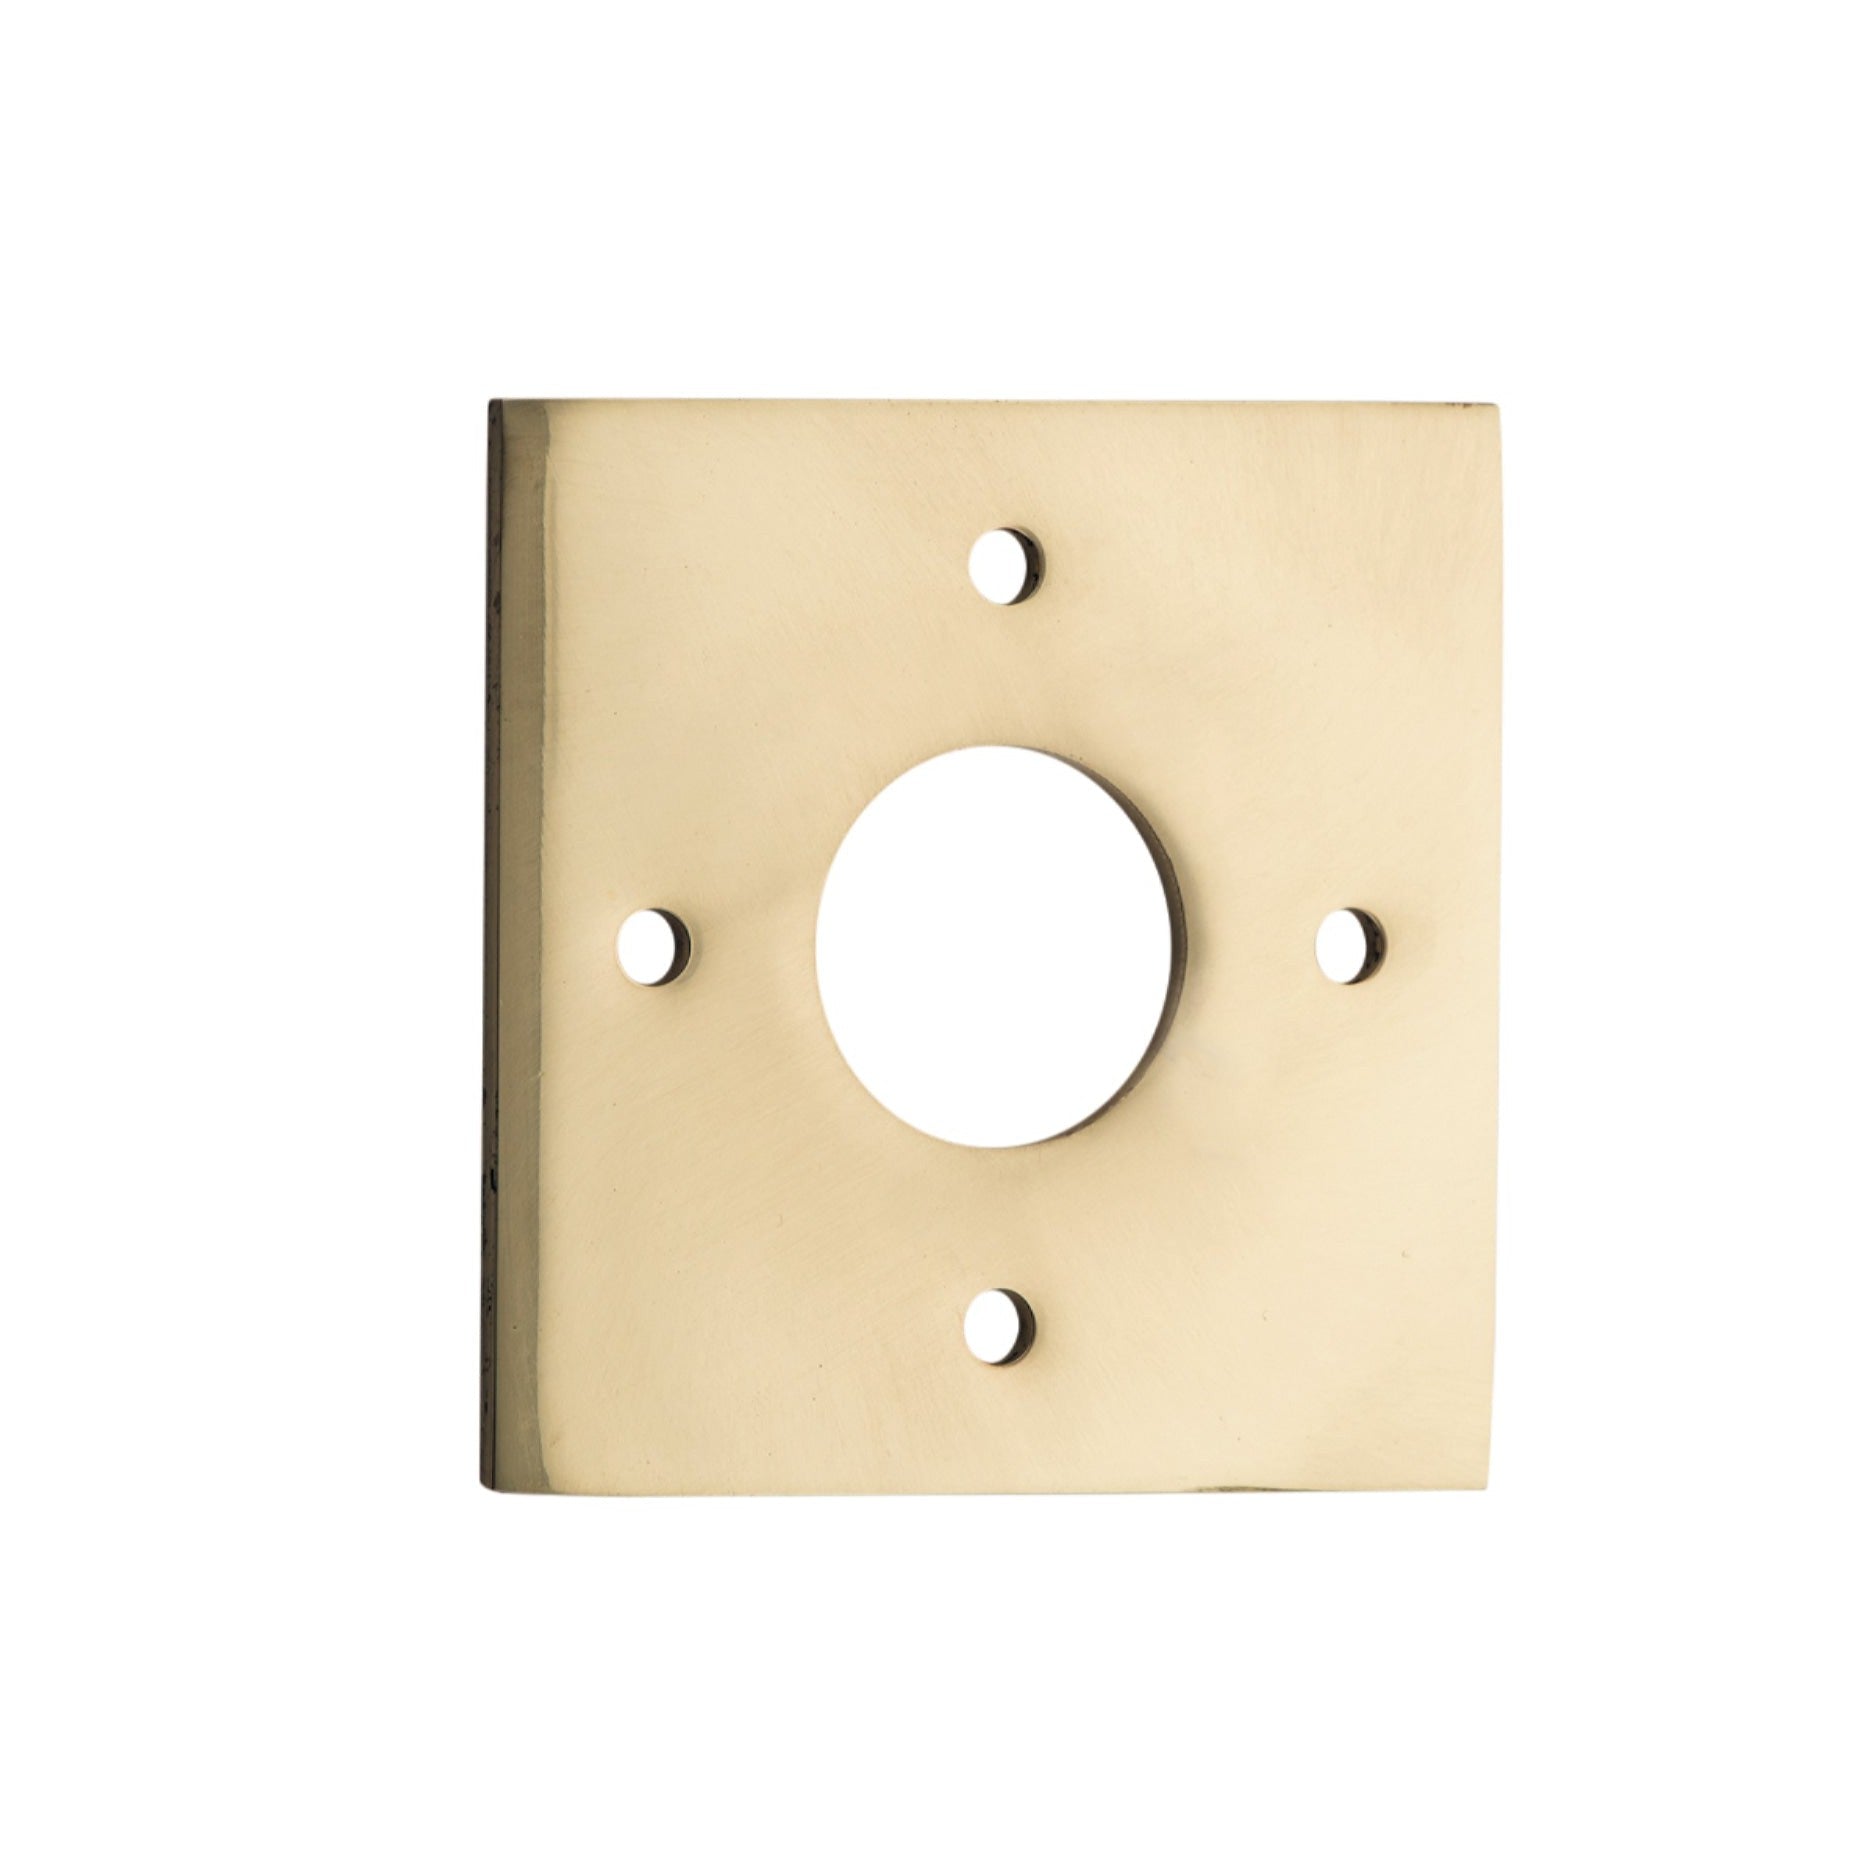 Iver Door Handles & Knobs Adaptor Plate Pair Square Rose Polished Brass